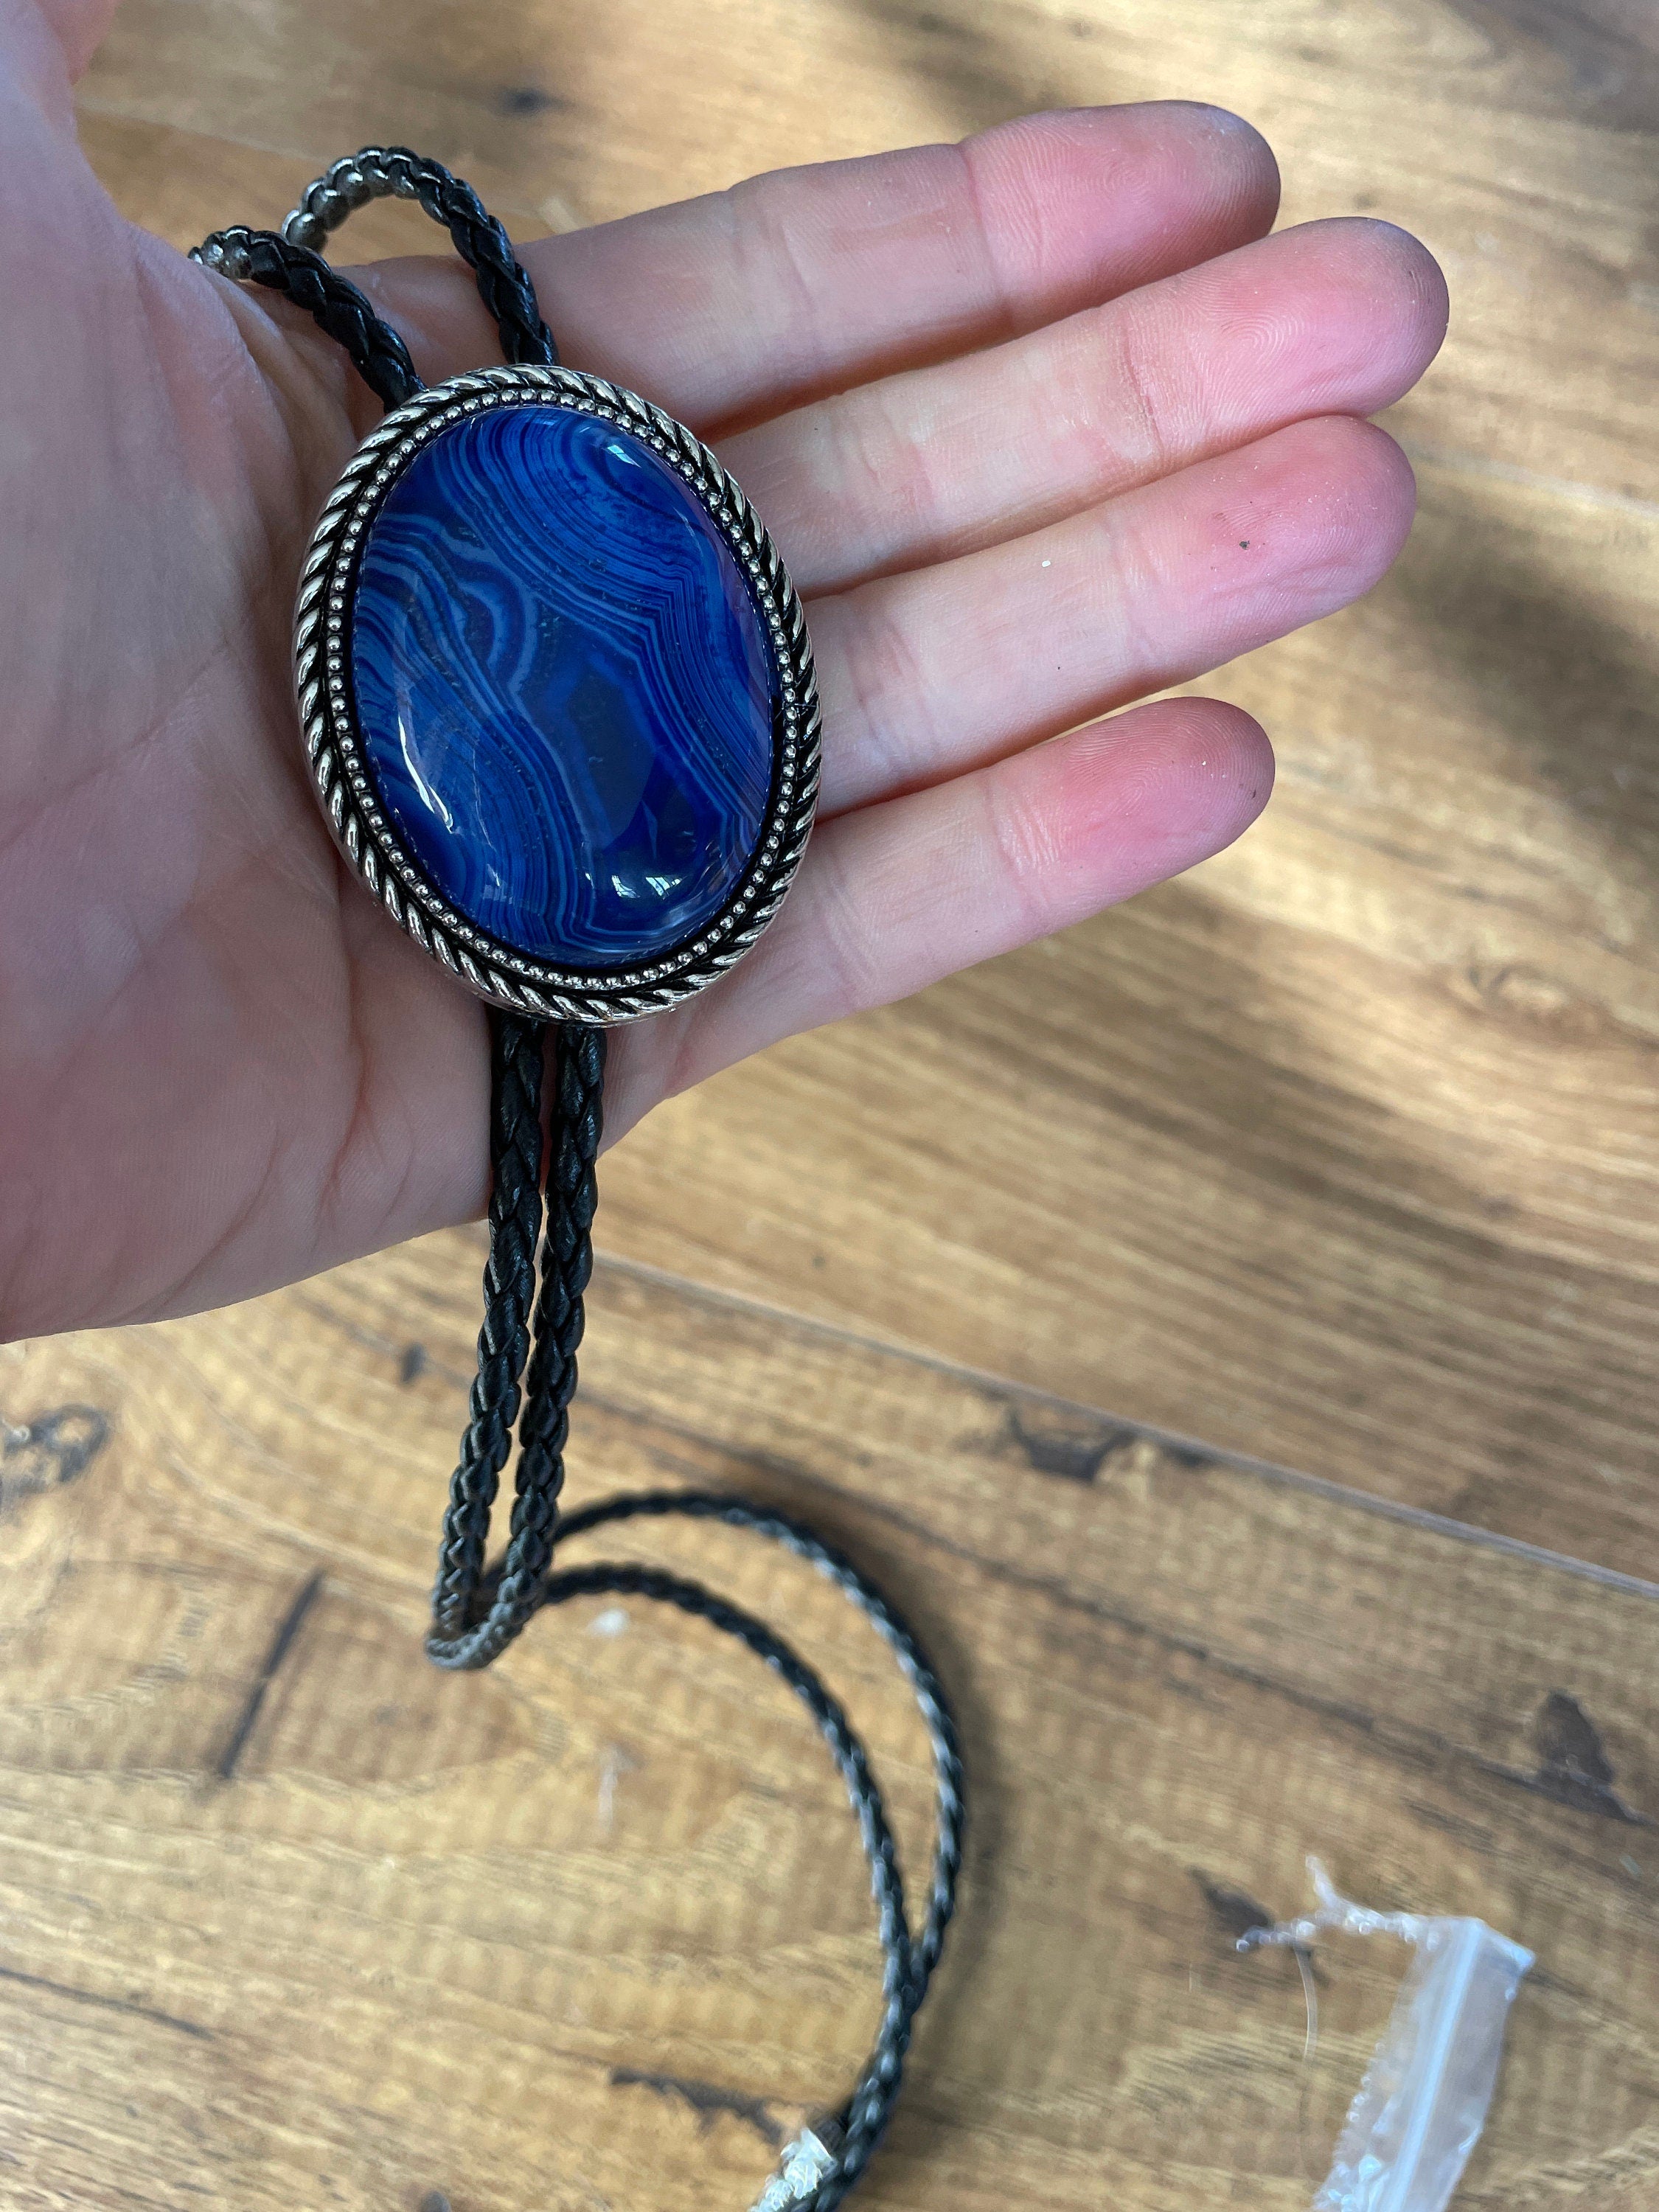 Blue Agave Bolo Tie